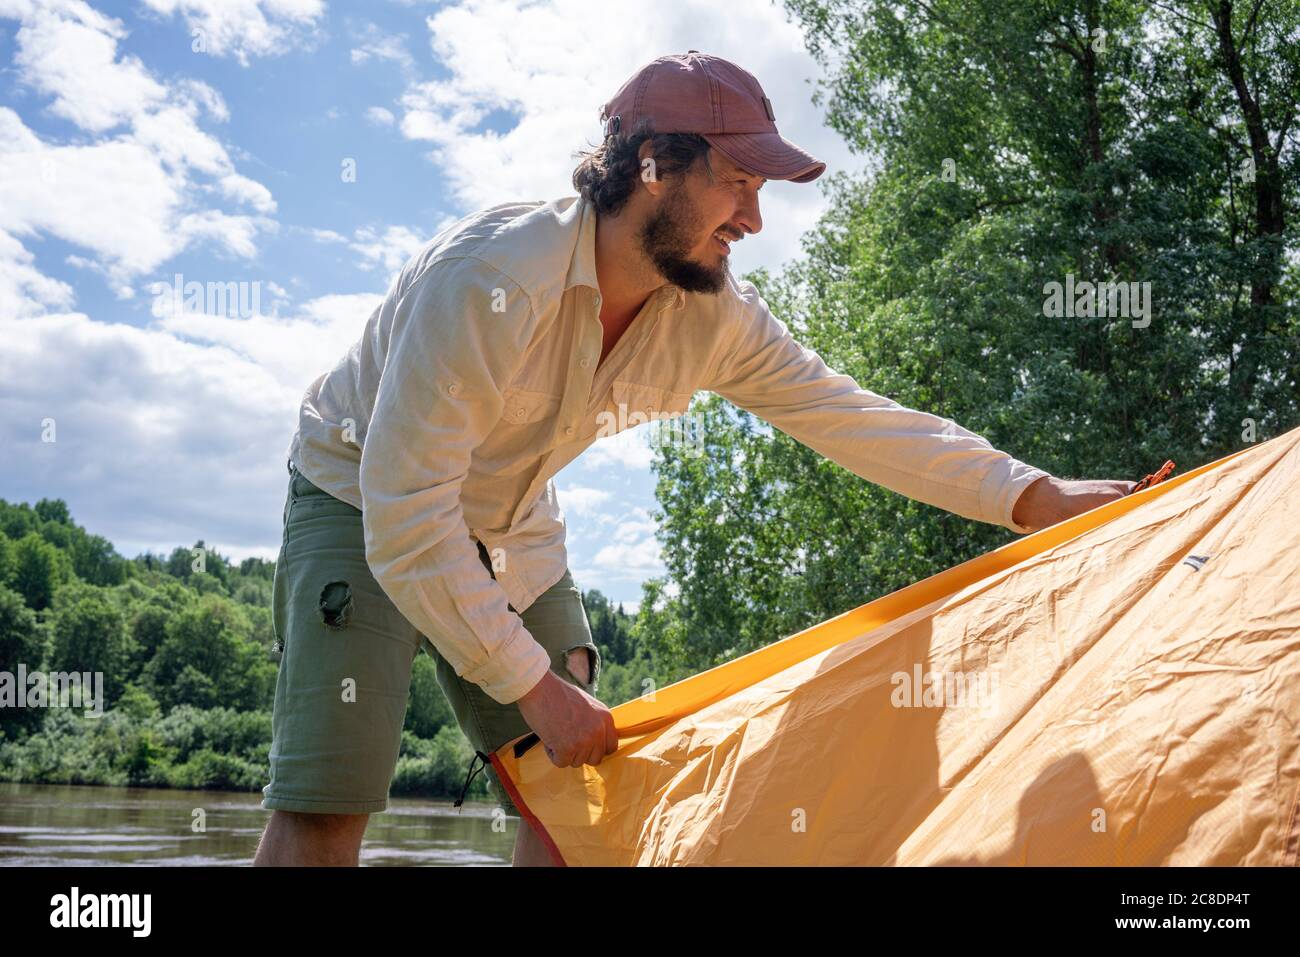 Mid adult man installing tent in forest against sky at campsite Stock Photo